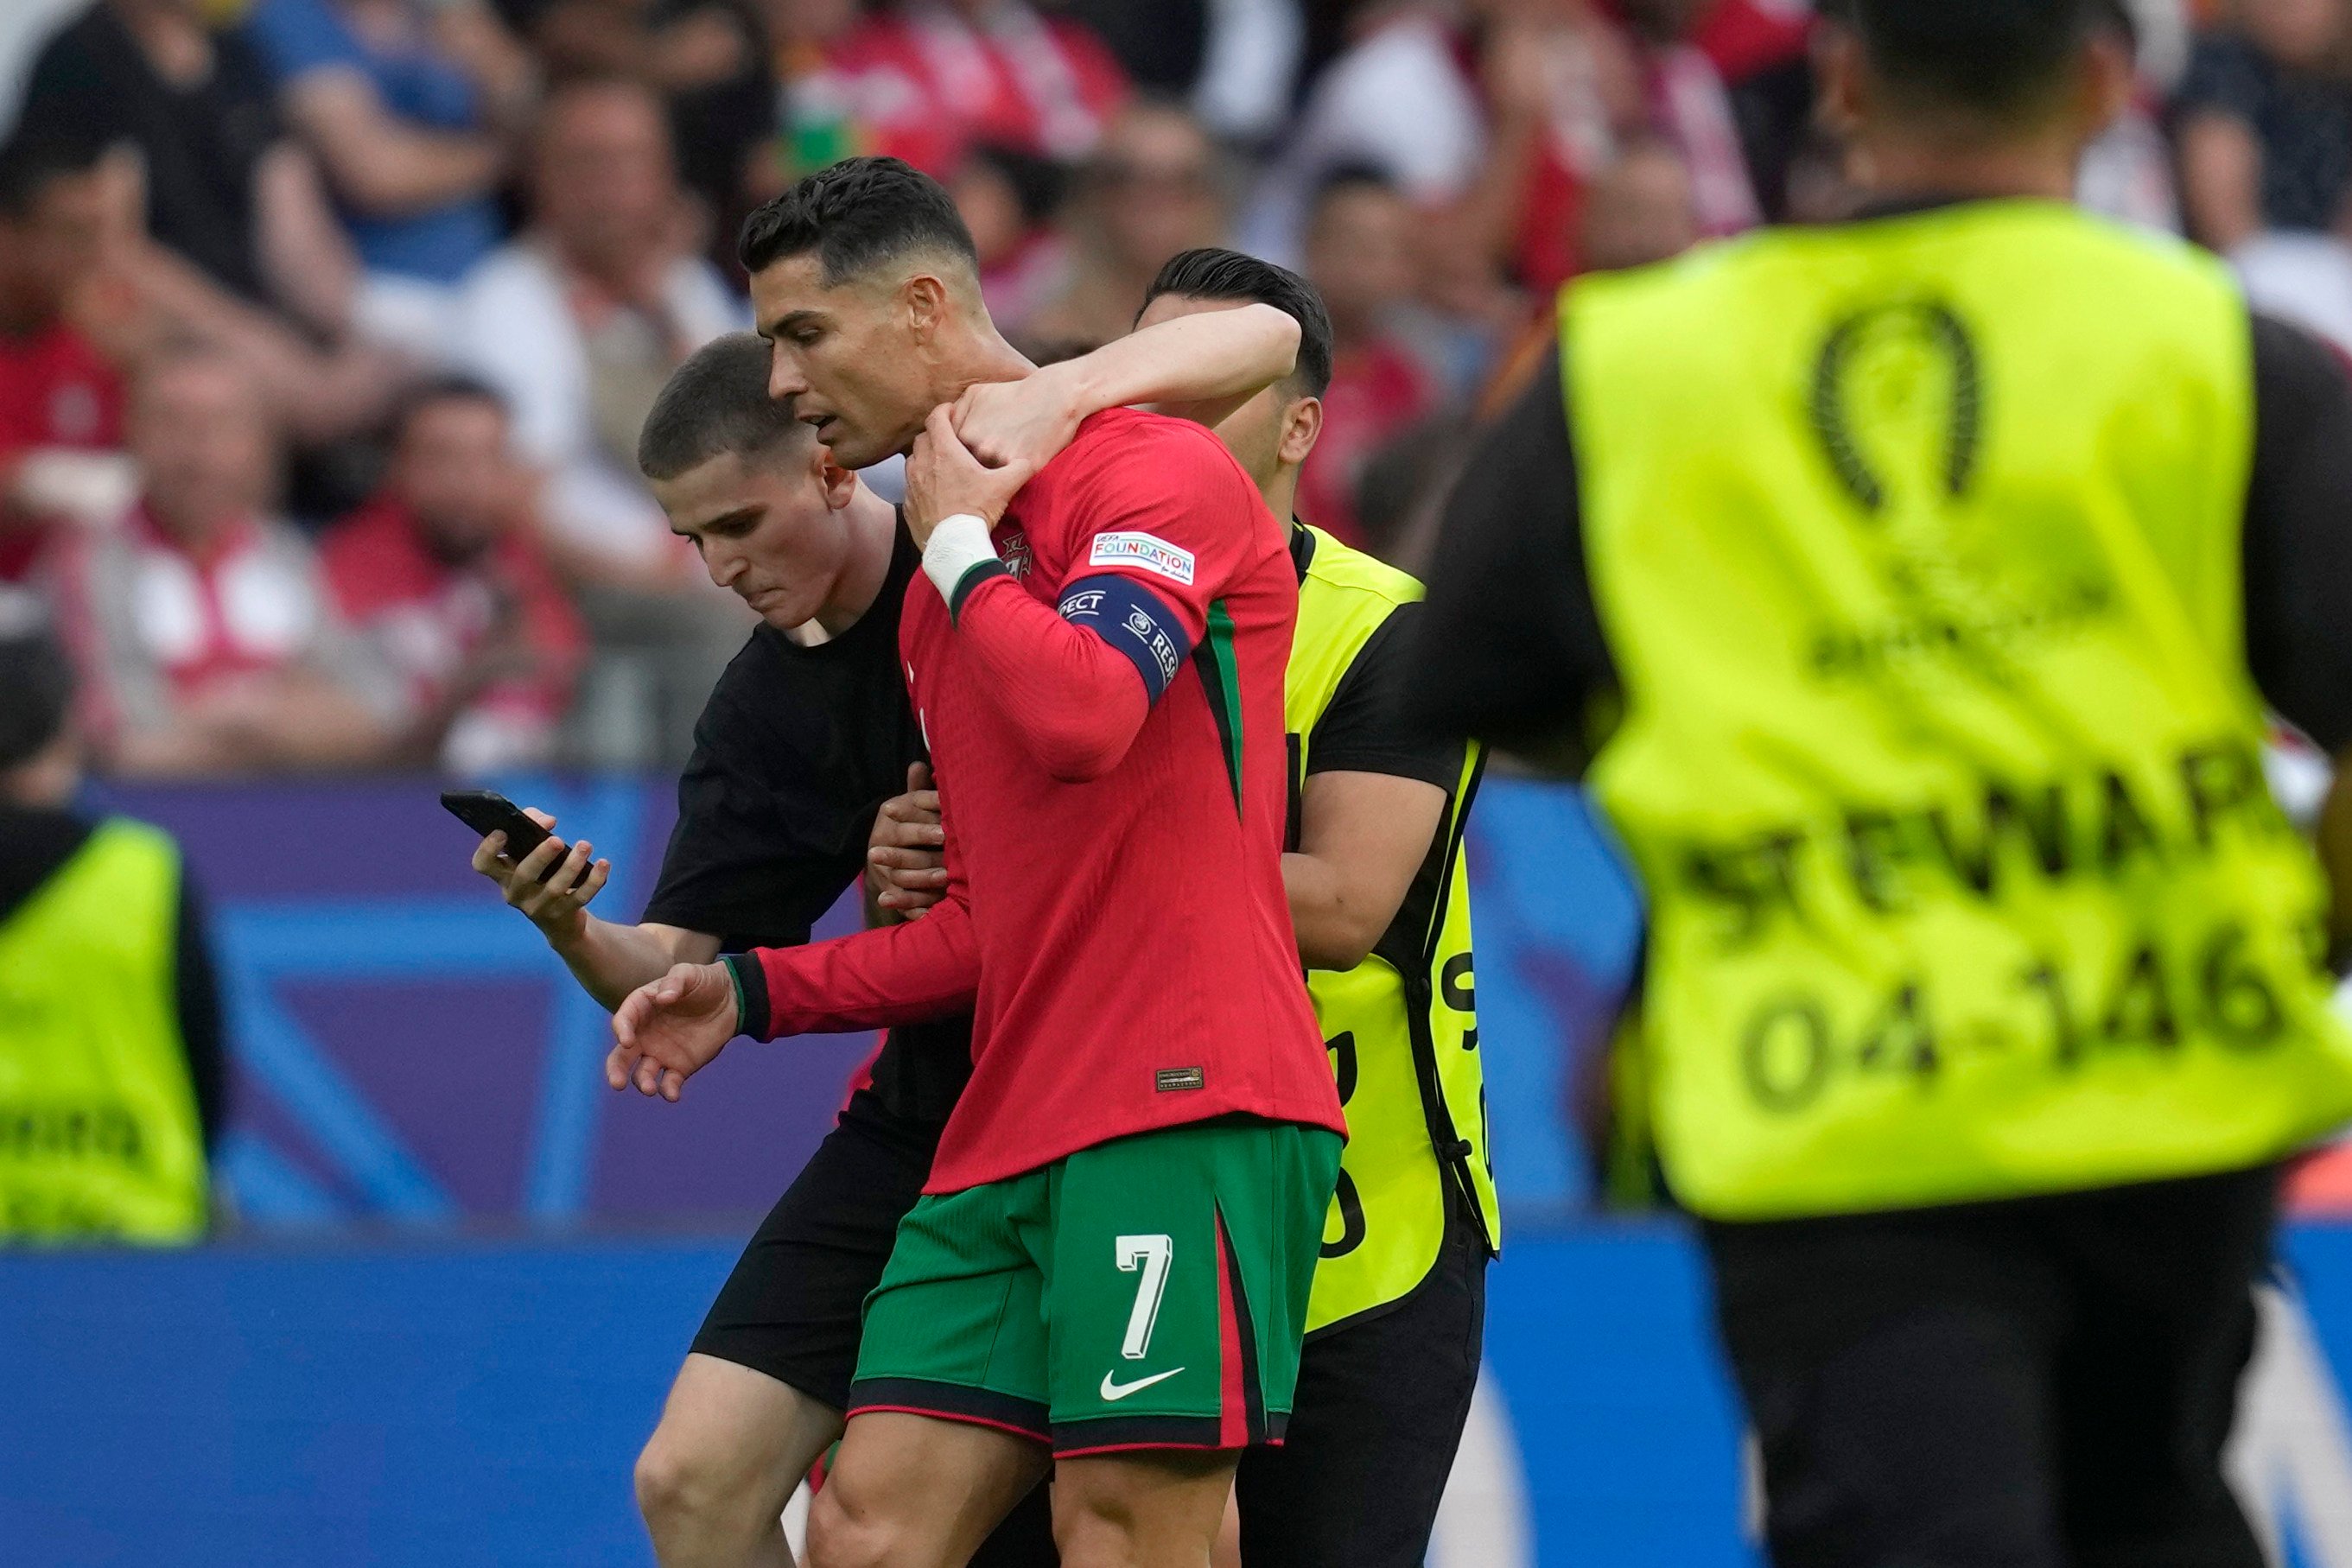 A pitch invader tries to take a selfie with Portugal’s Cristiano Ronaldo during a match between Turkey and Portugal at the Euro 2024 football tournament in Dortmund, Germany on Saturday. Photo: AP